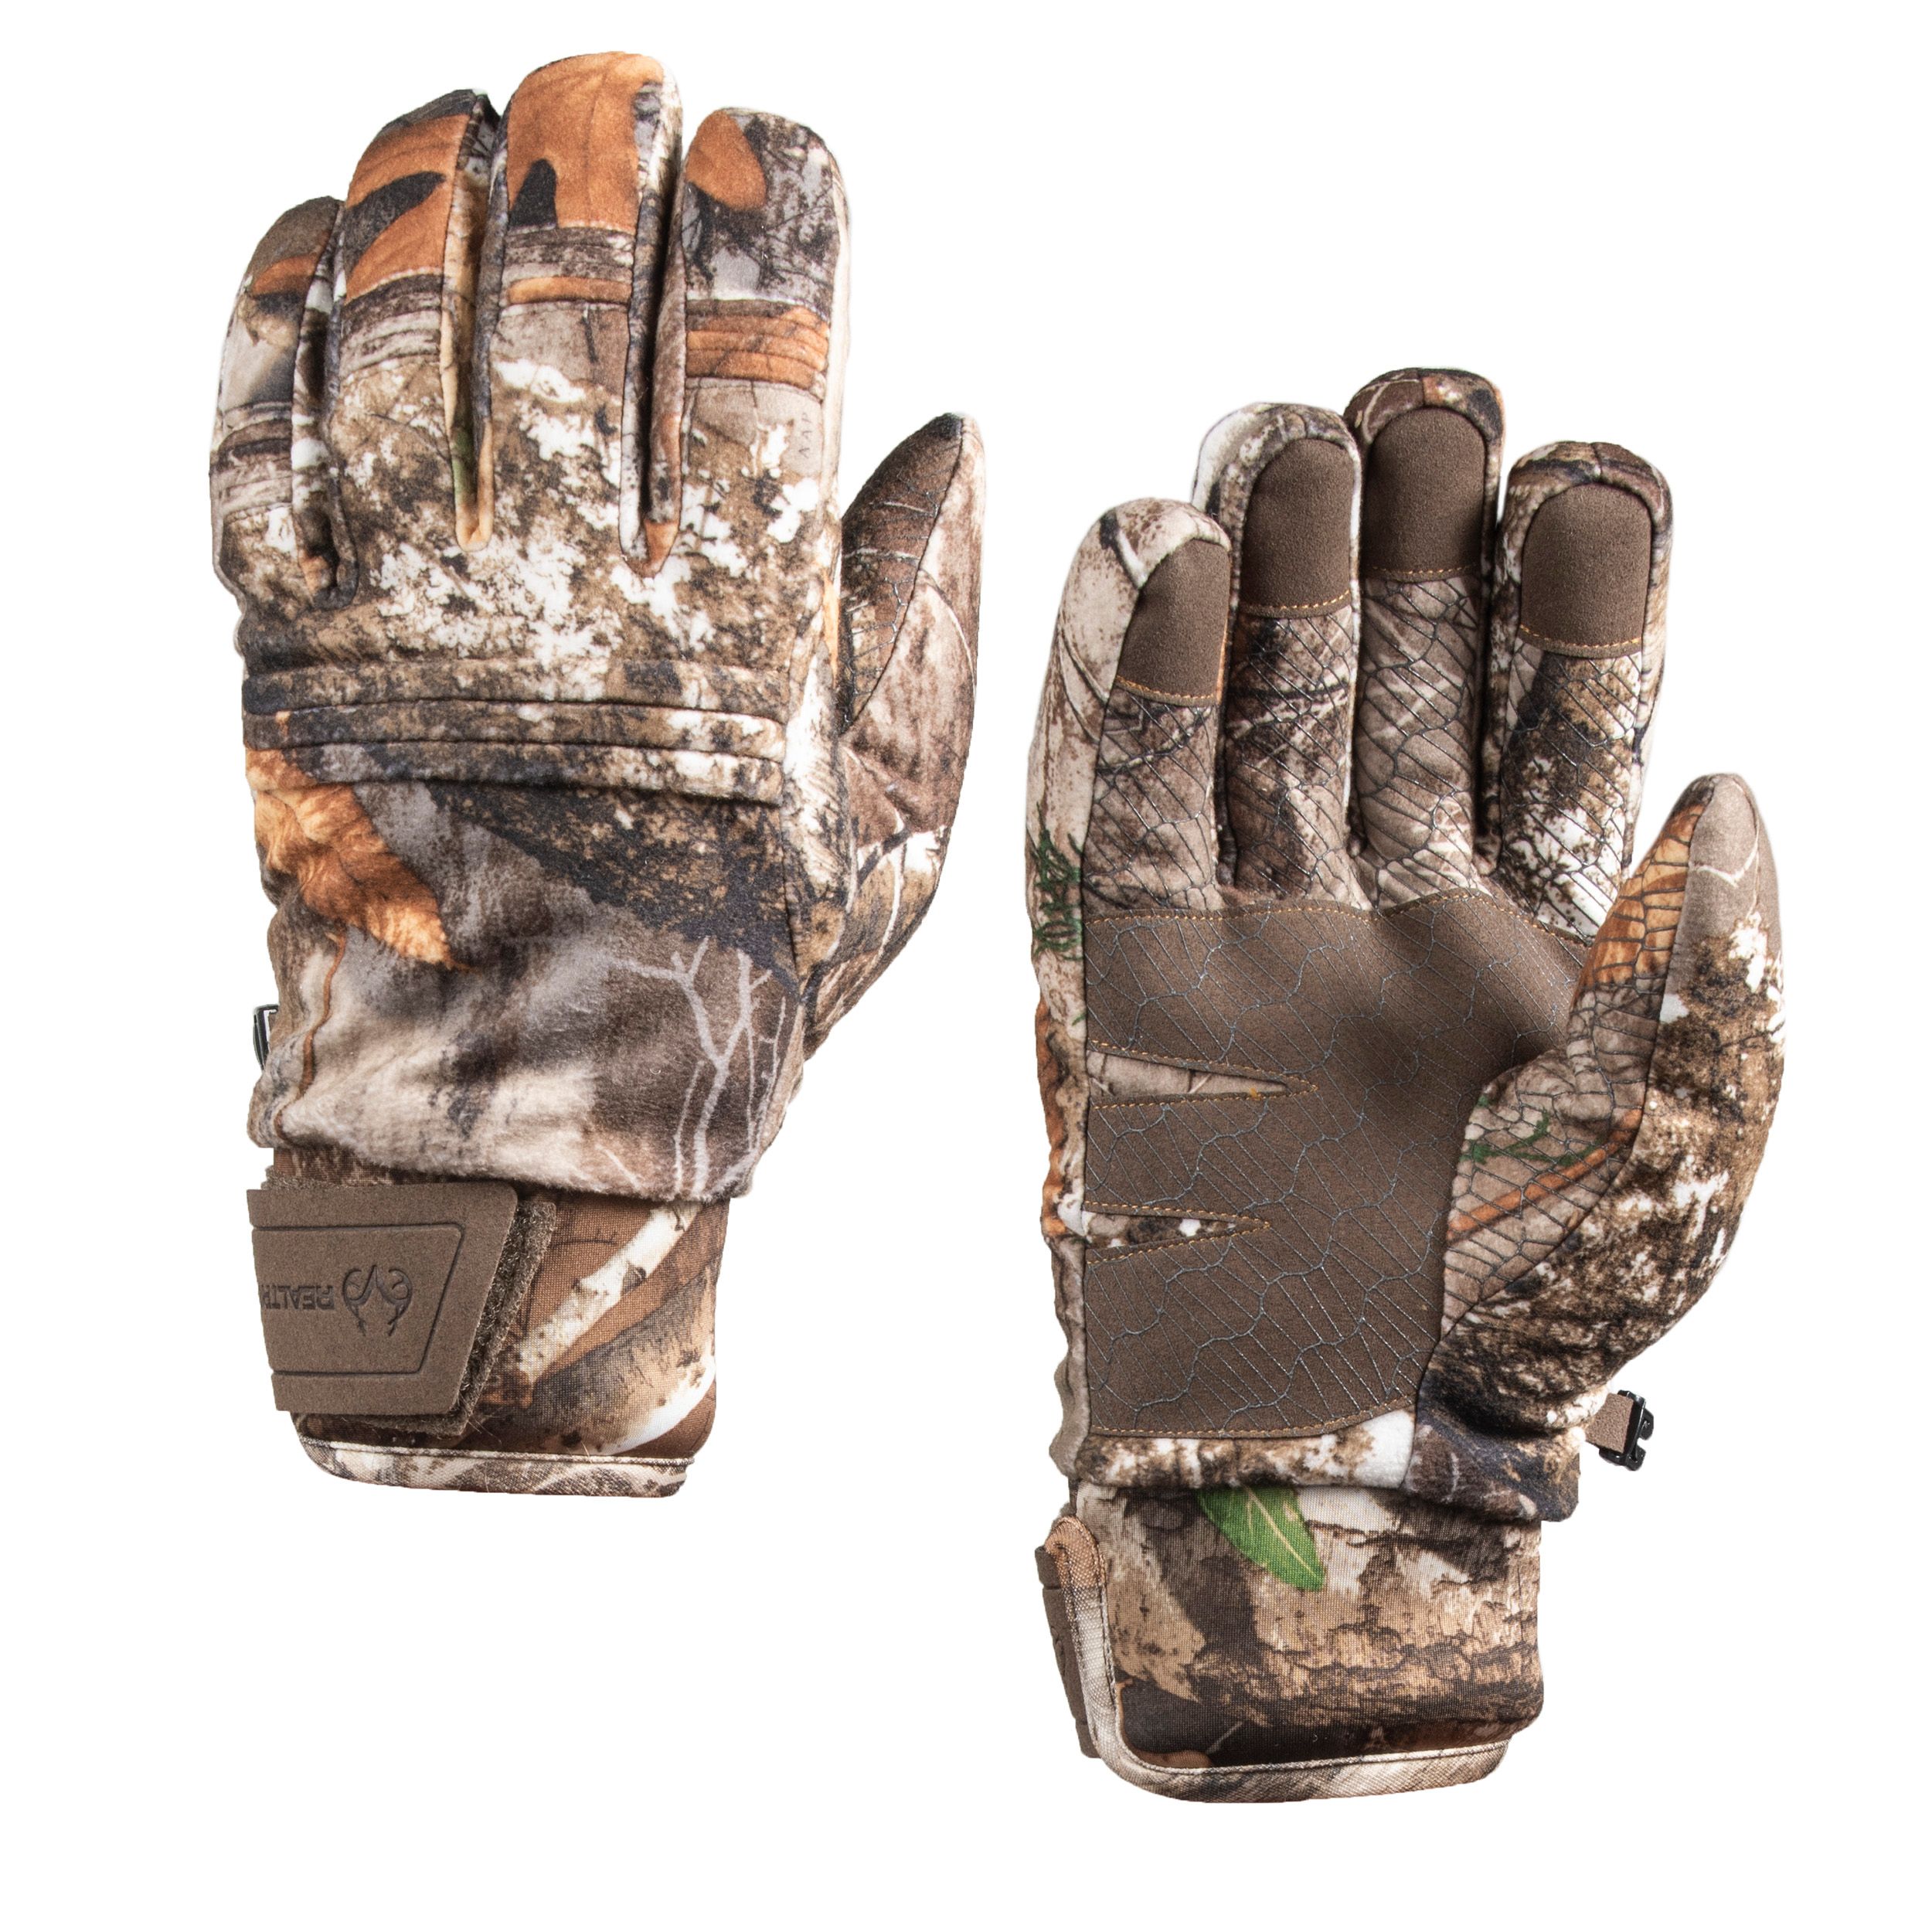 Realtree Edge Men's Heavyweight Gloves, Sizes M-L/XL - image 1 of 5